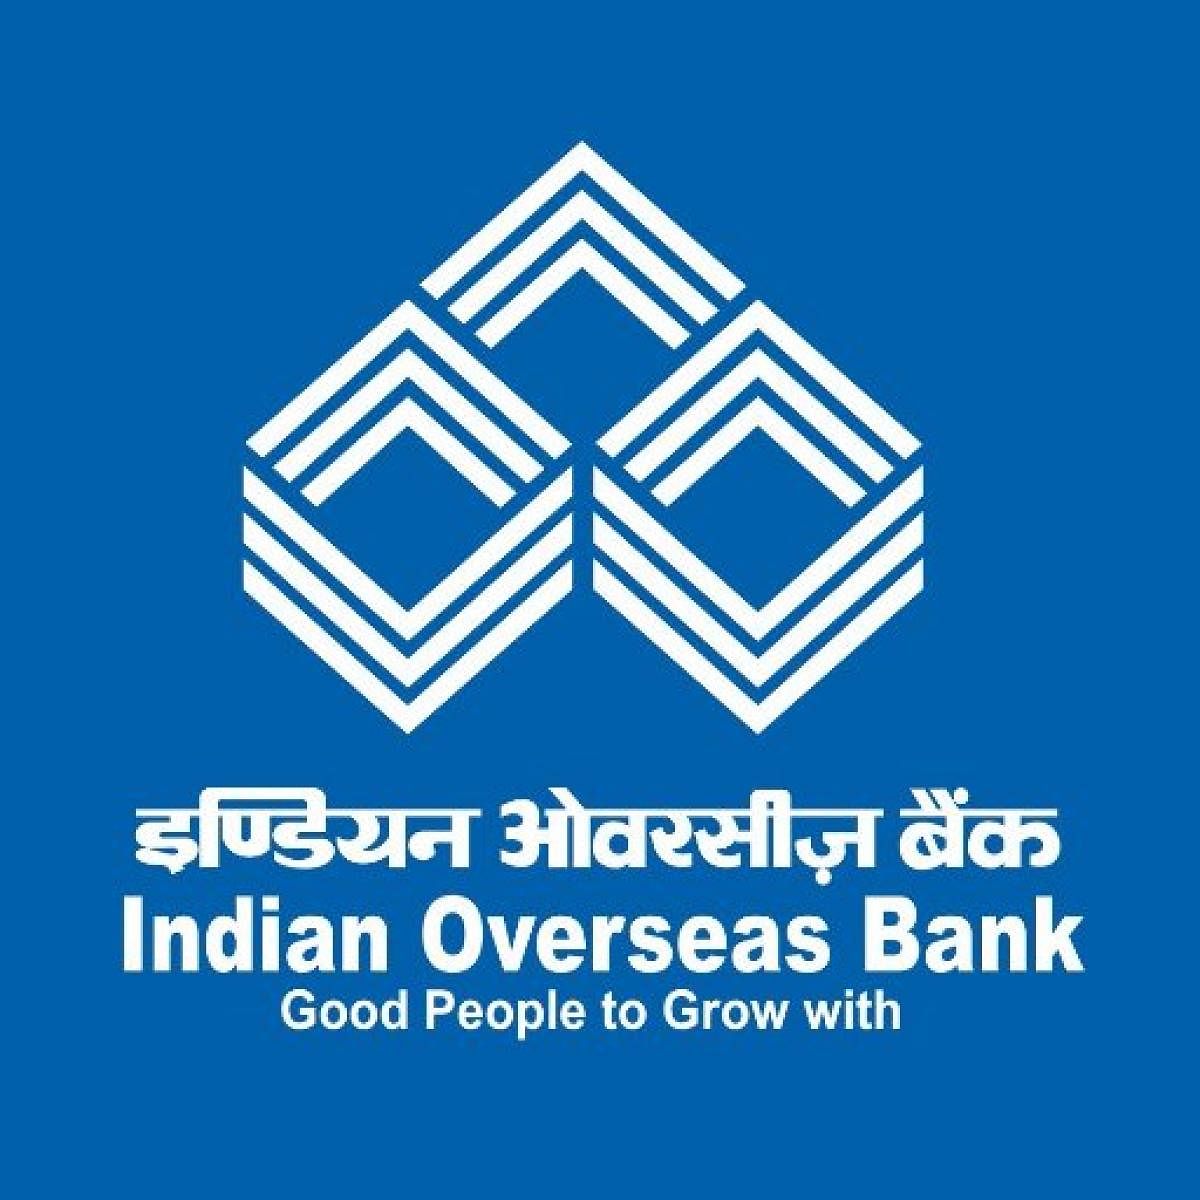 IOB has reported widening of net loss to Rs. 2,253.64 crore for the quarter ended September 30, 2019. (Twitter @IOBIndia)